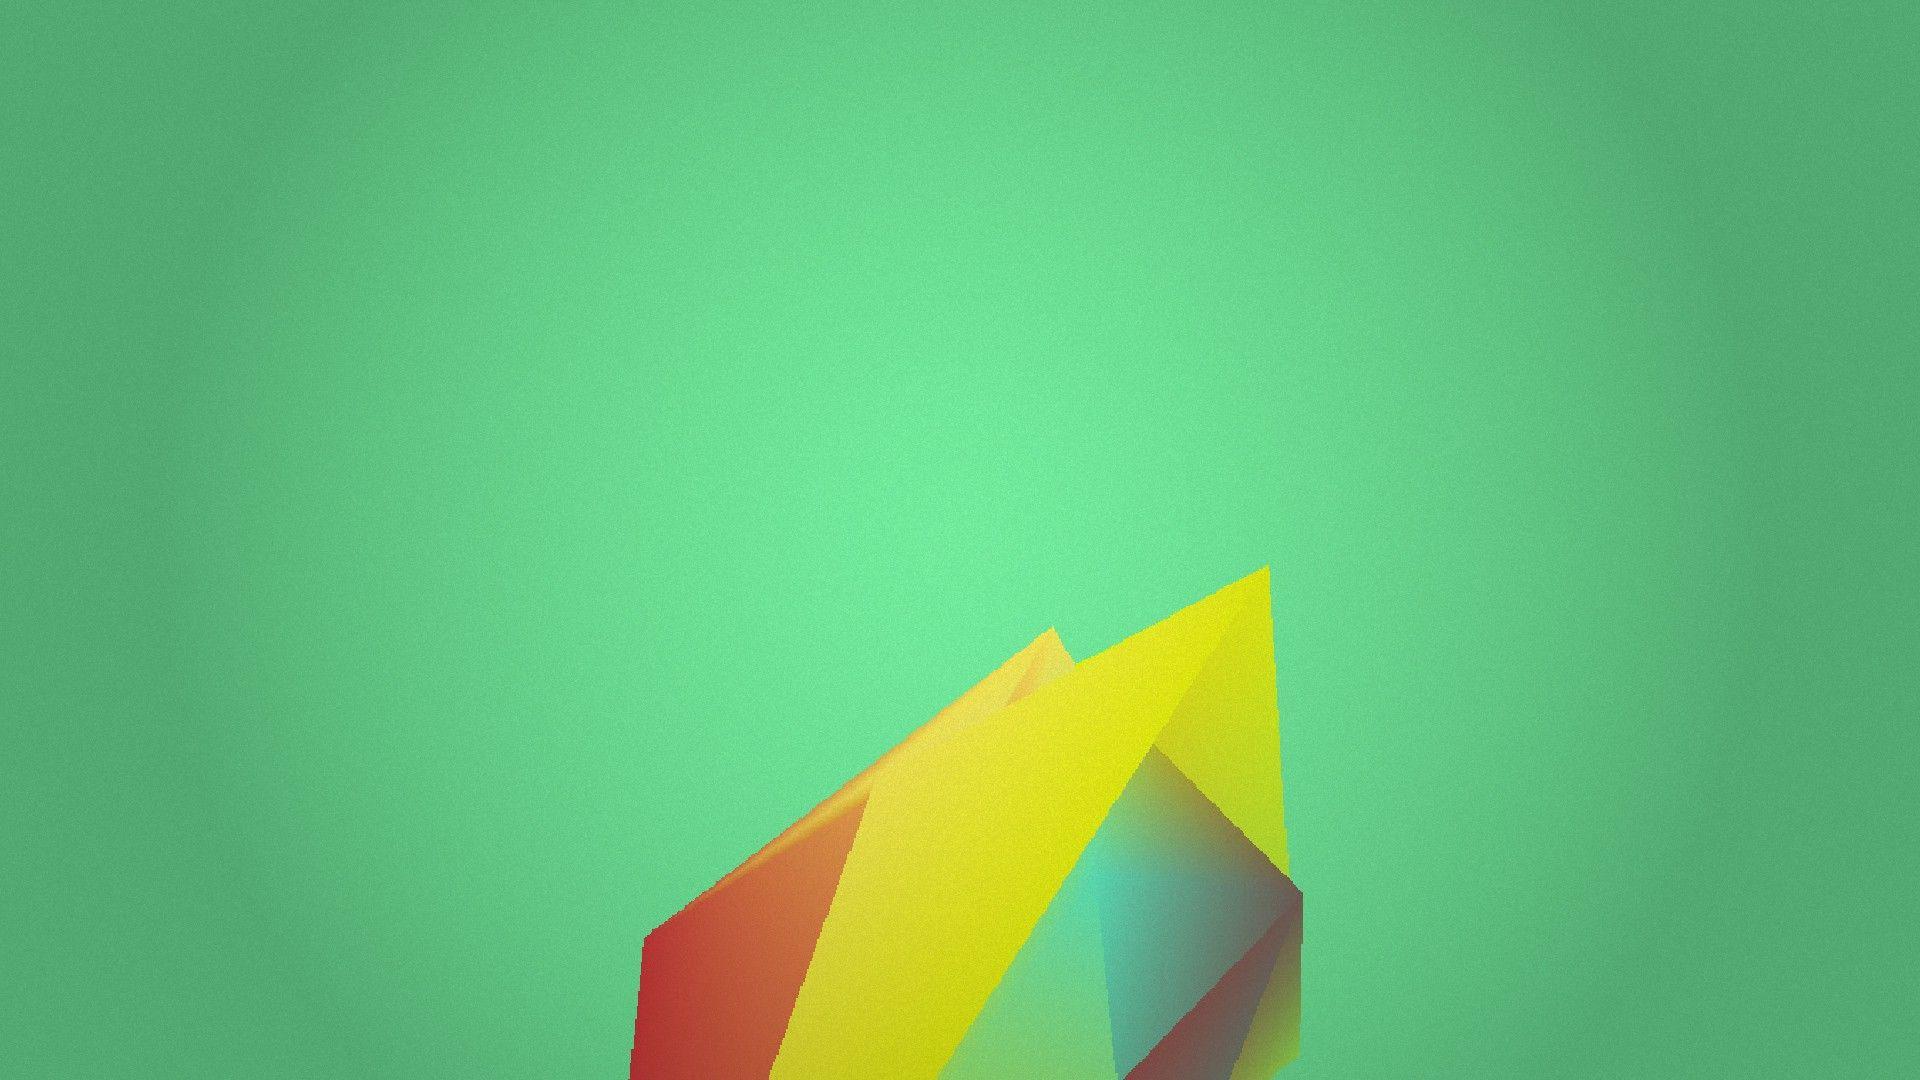 Yellow Triangle with Green Circle Logo - Wallpaper : colorful, illustration, digital art, abstract, pixel art